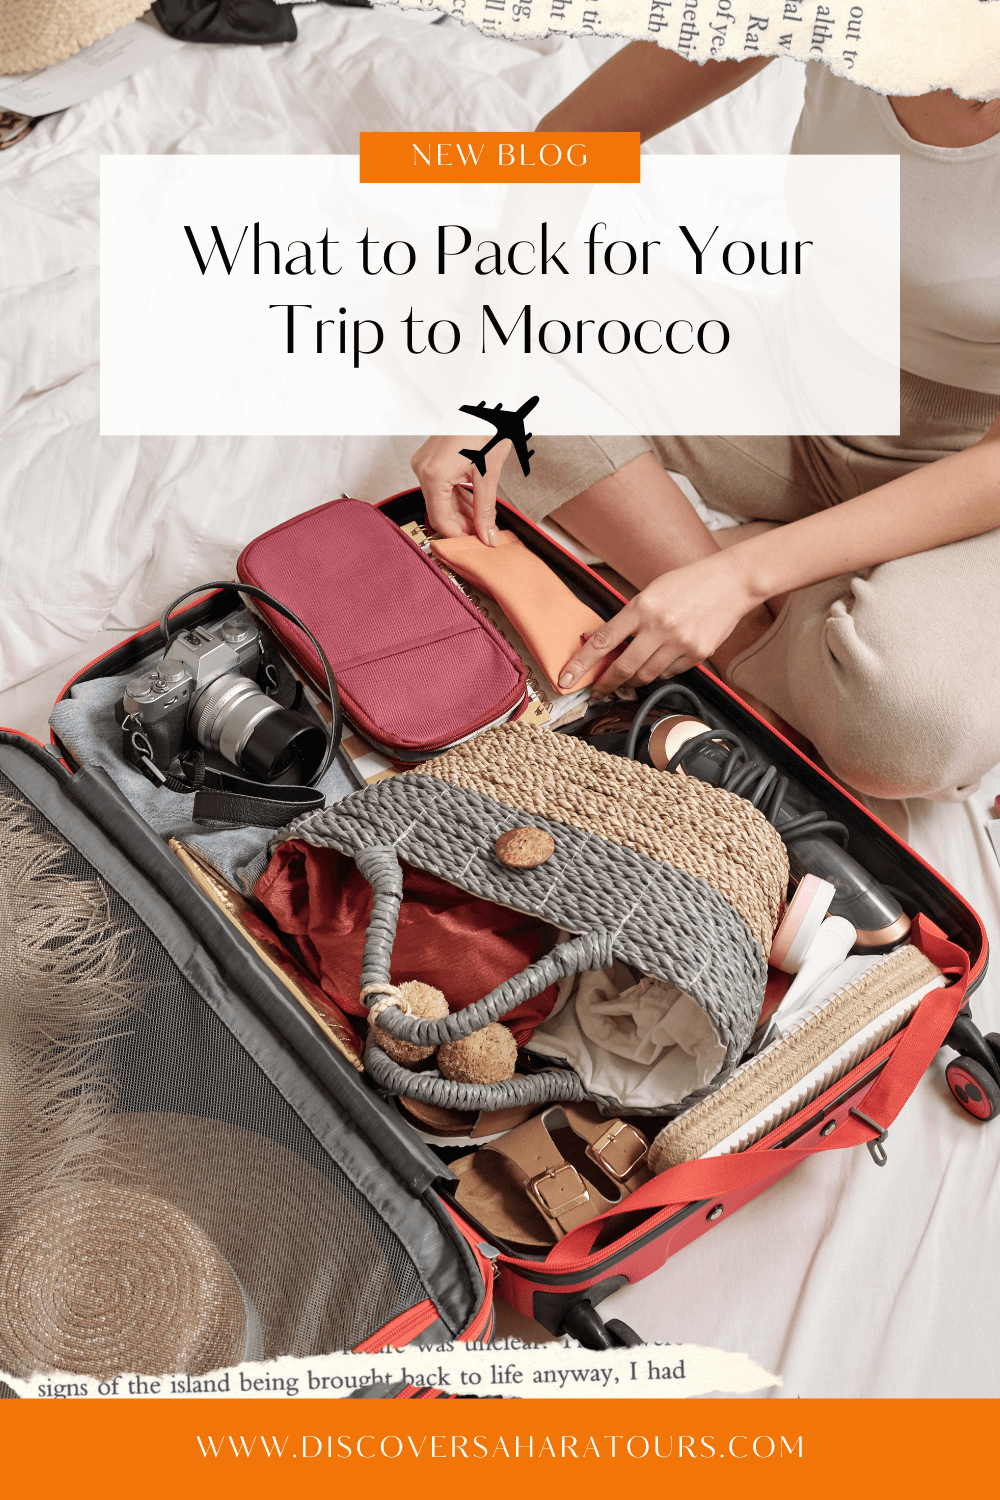 Featured image for “What to pack for your trip to Morocco”